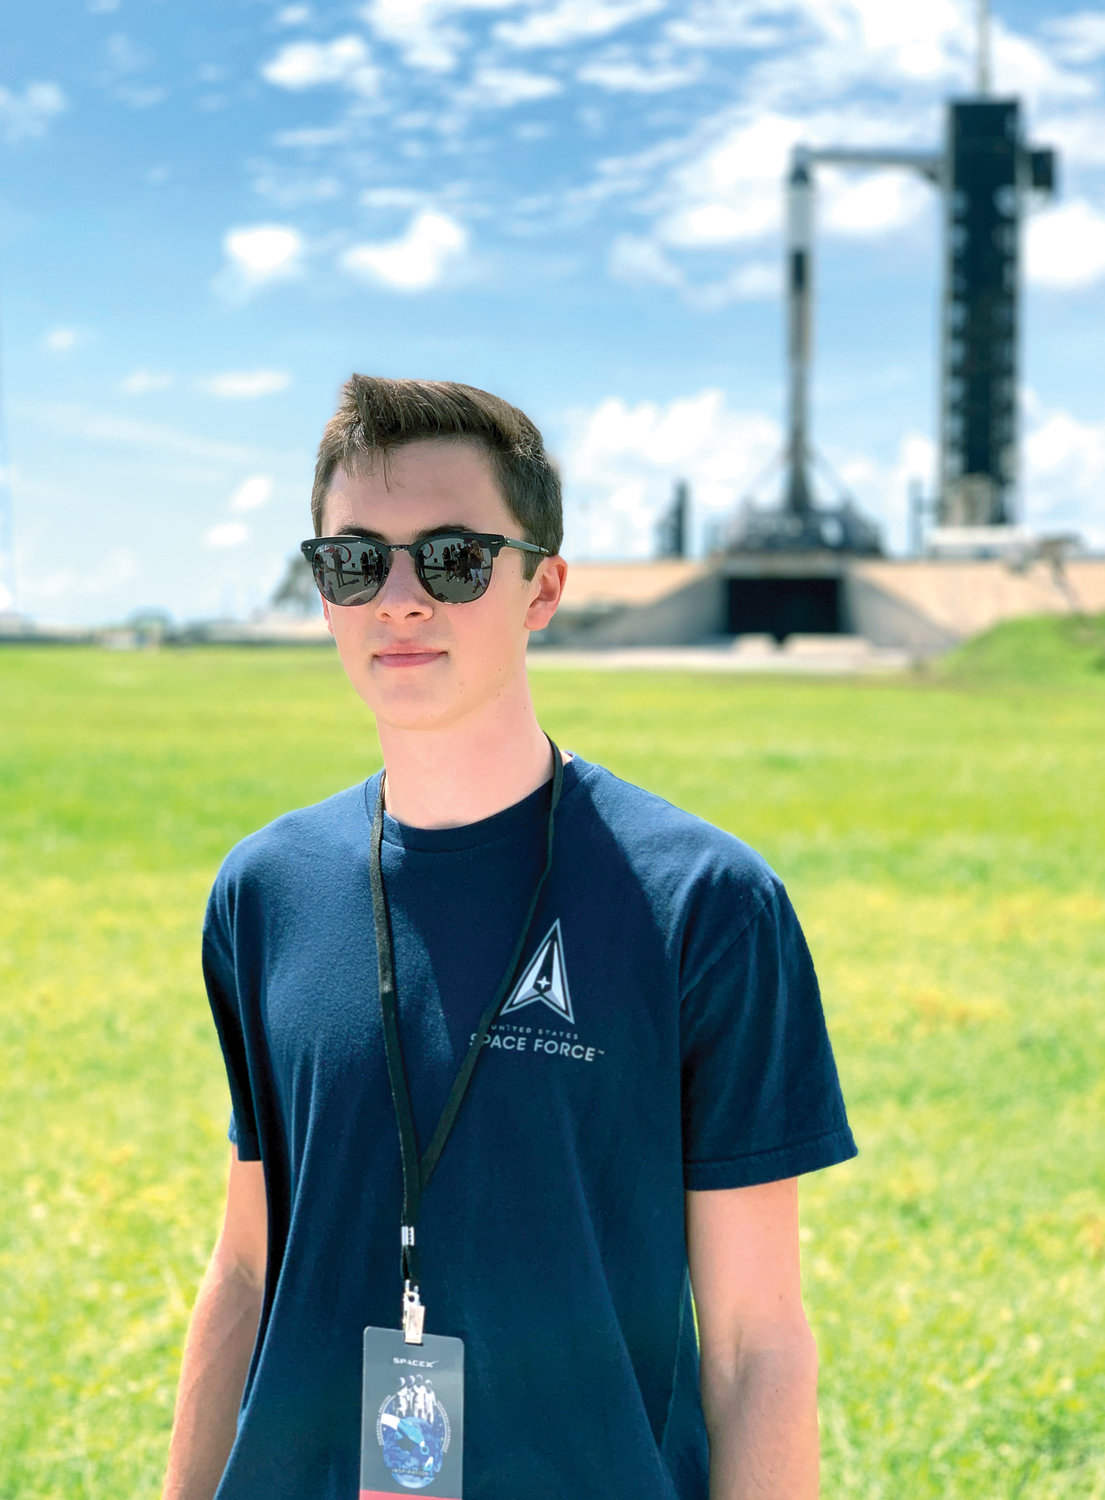 Fordham Prep senior Charlie Reilly was treated to a trip to Cape Canaveral, Fla., in September to watch the launch of SpaceX’s first all-civilian spaceflight.